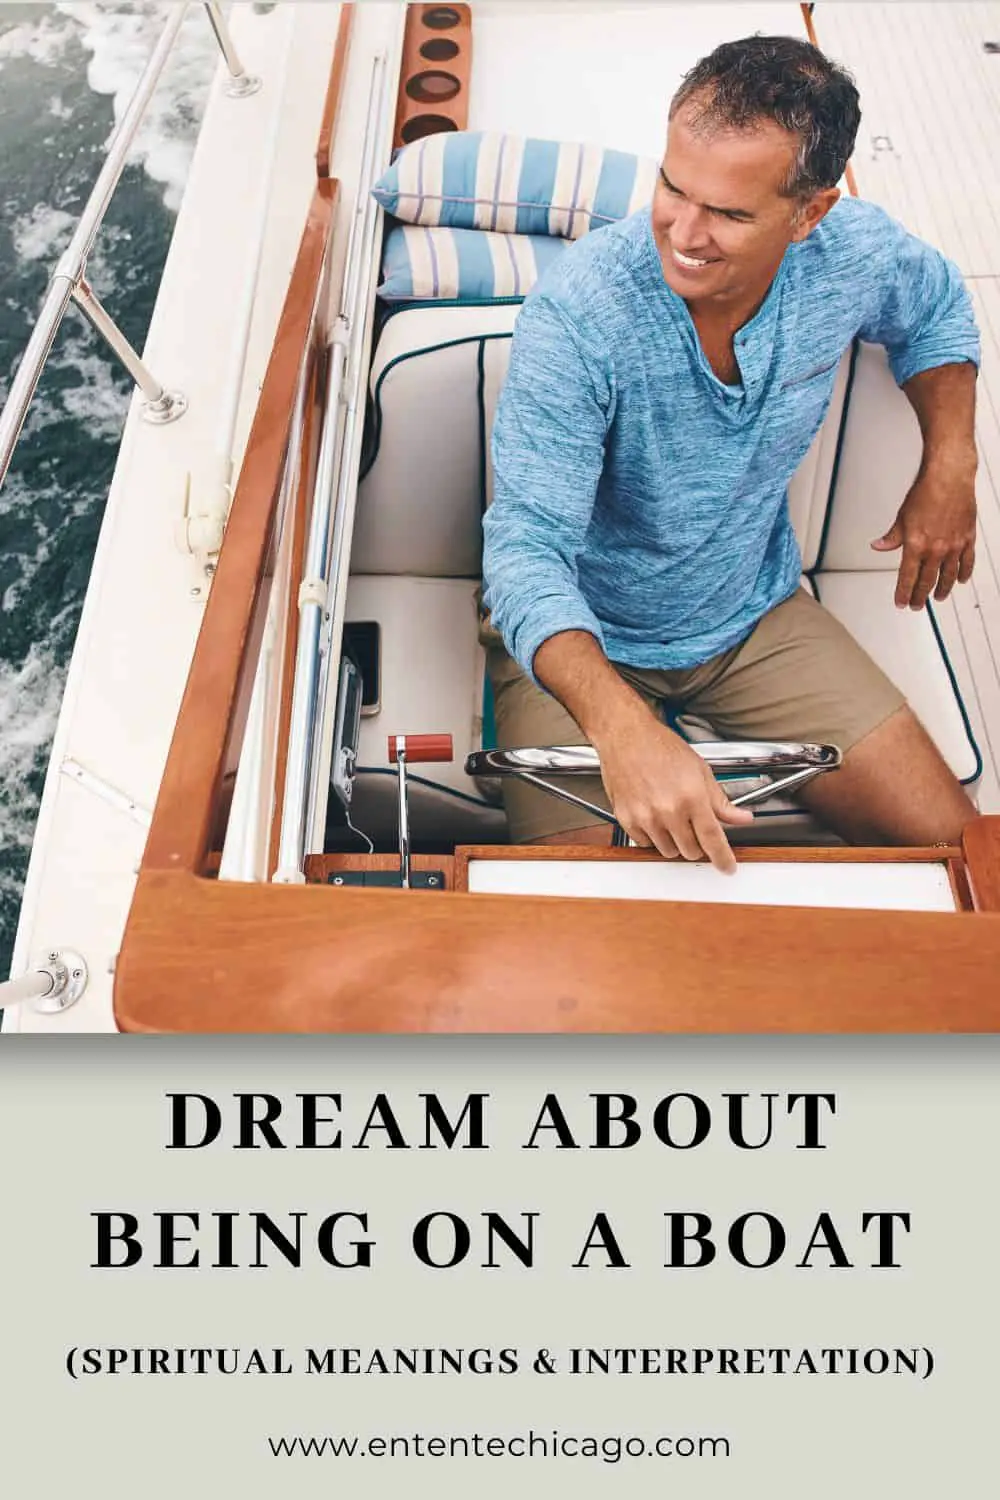 What Are The Common Dreams That Follow A Dream Of Boat Sinking?